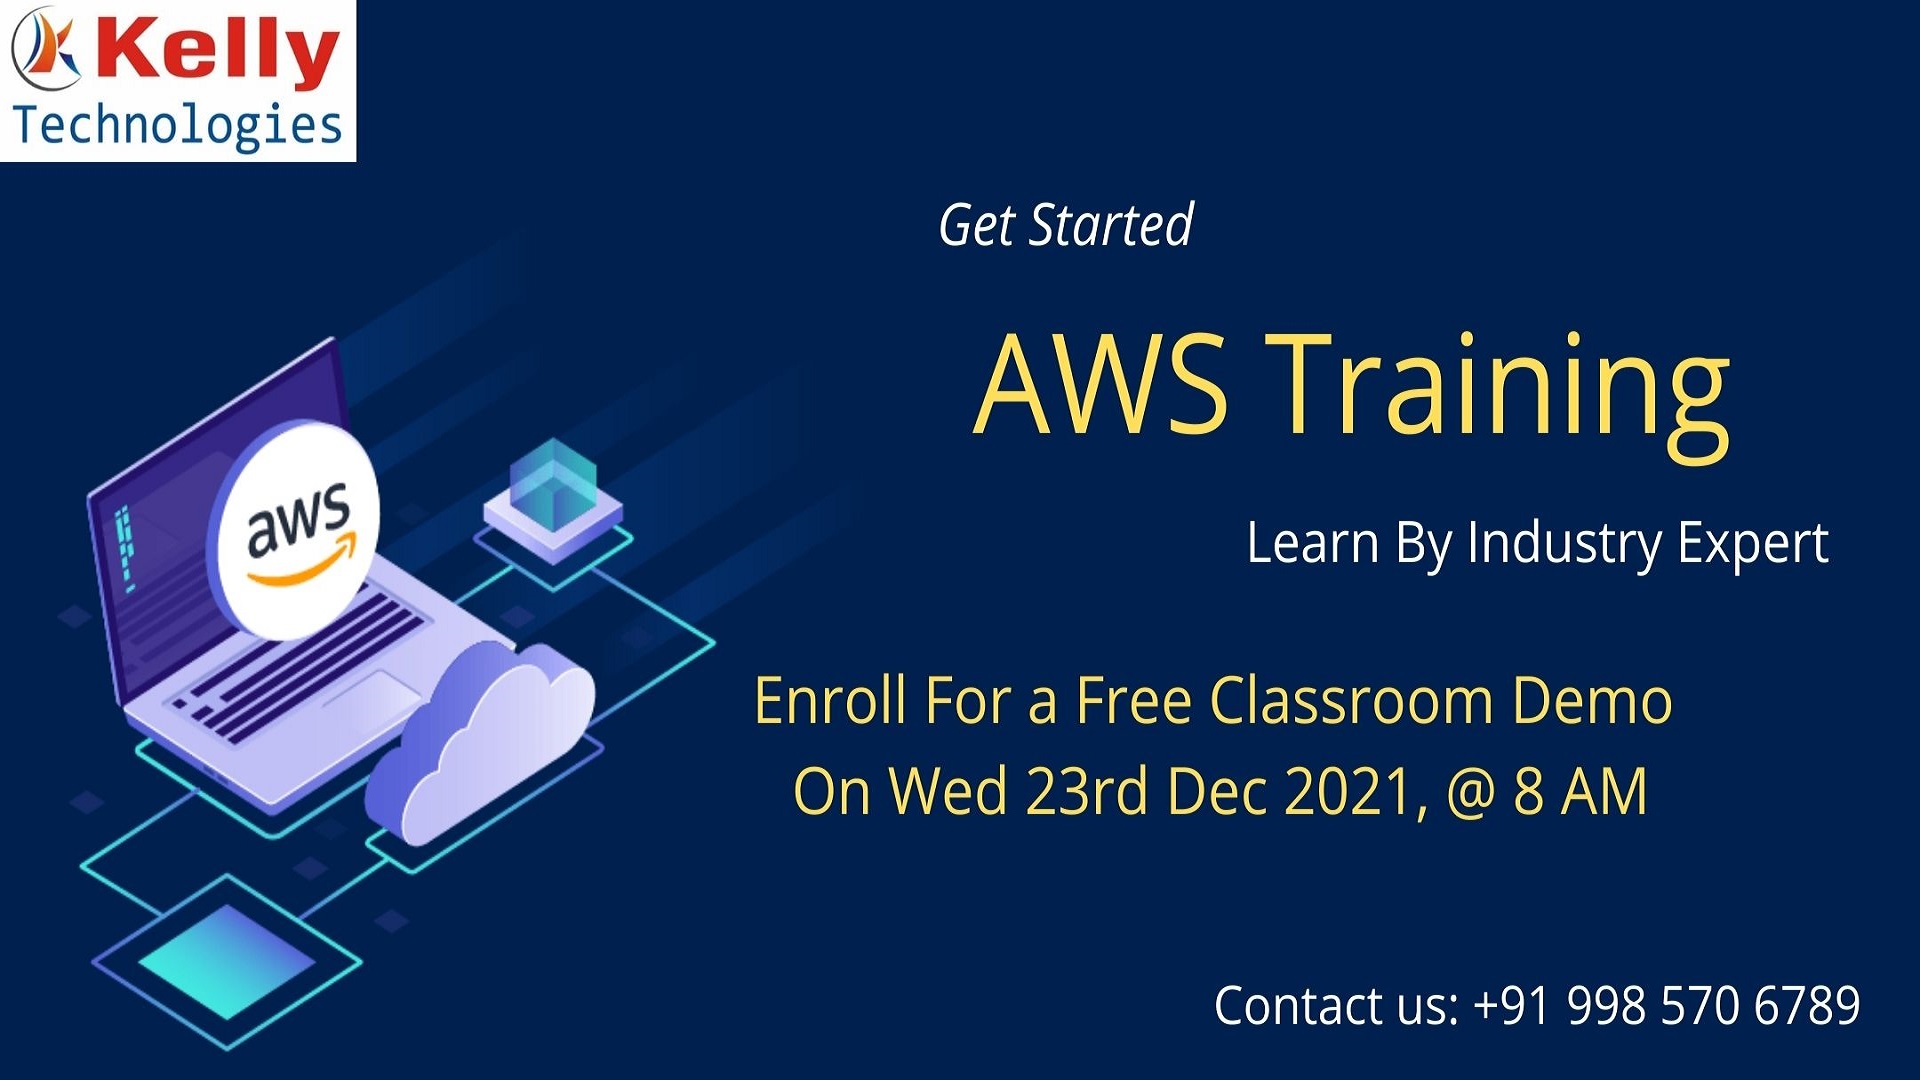 Register For AWS Free Classroom Demo Session On Wed 23rd Dec 2021, @ 8 AM, Hyderabad, Telangana, India